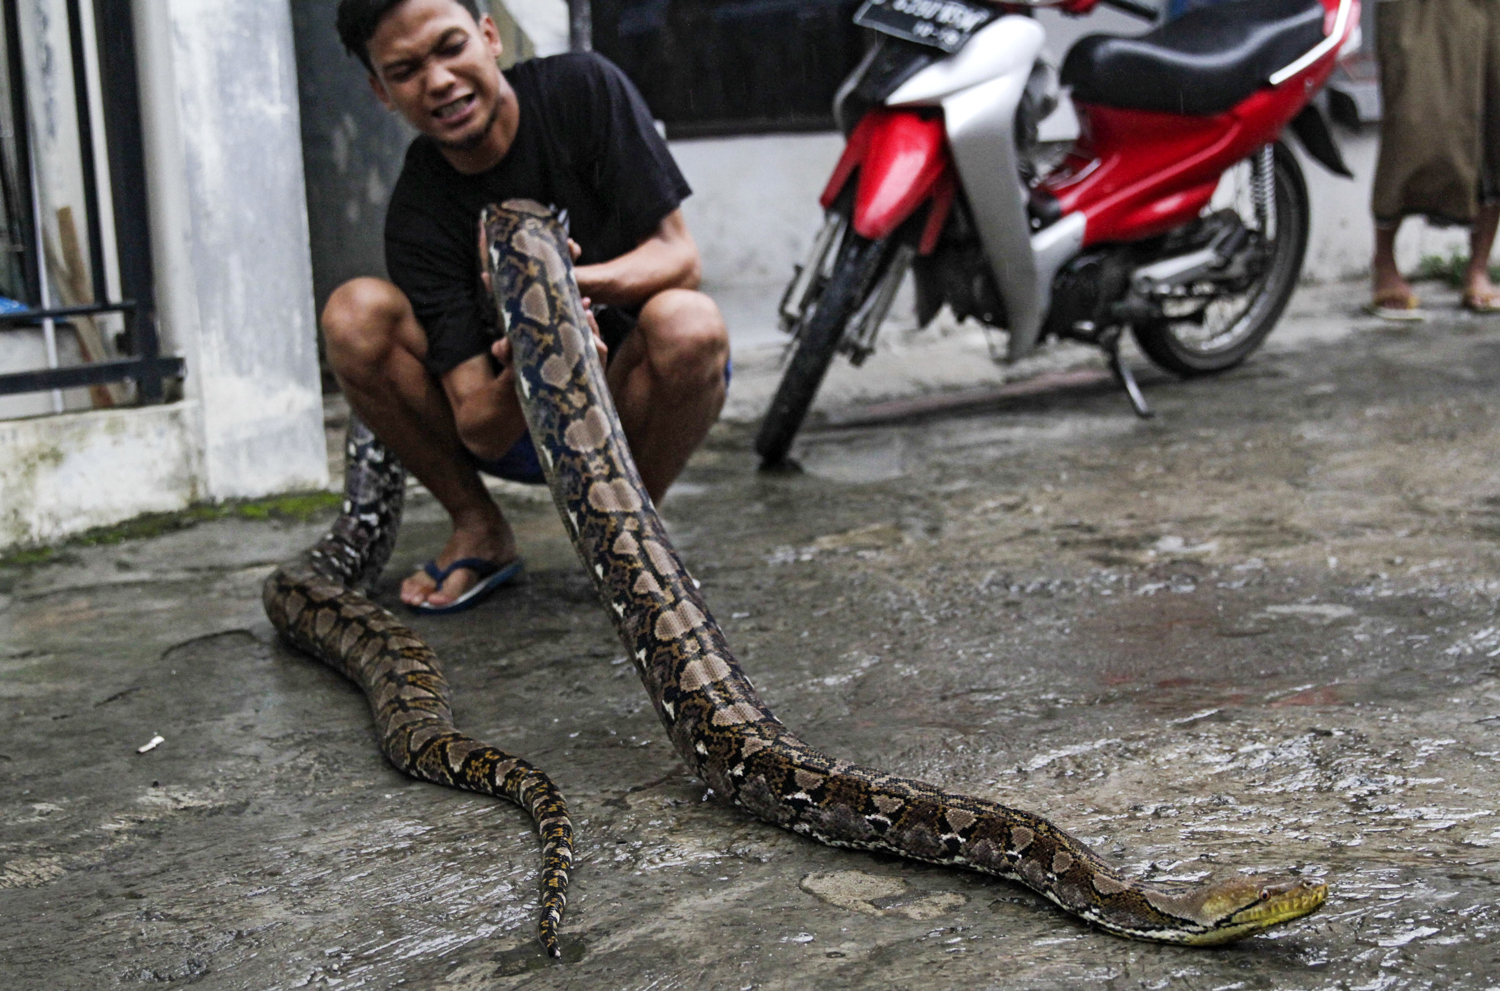 A man kneels on a street and holds a reticulated python with both hands.